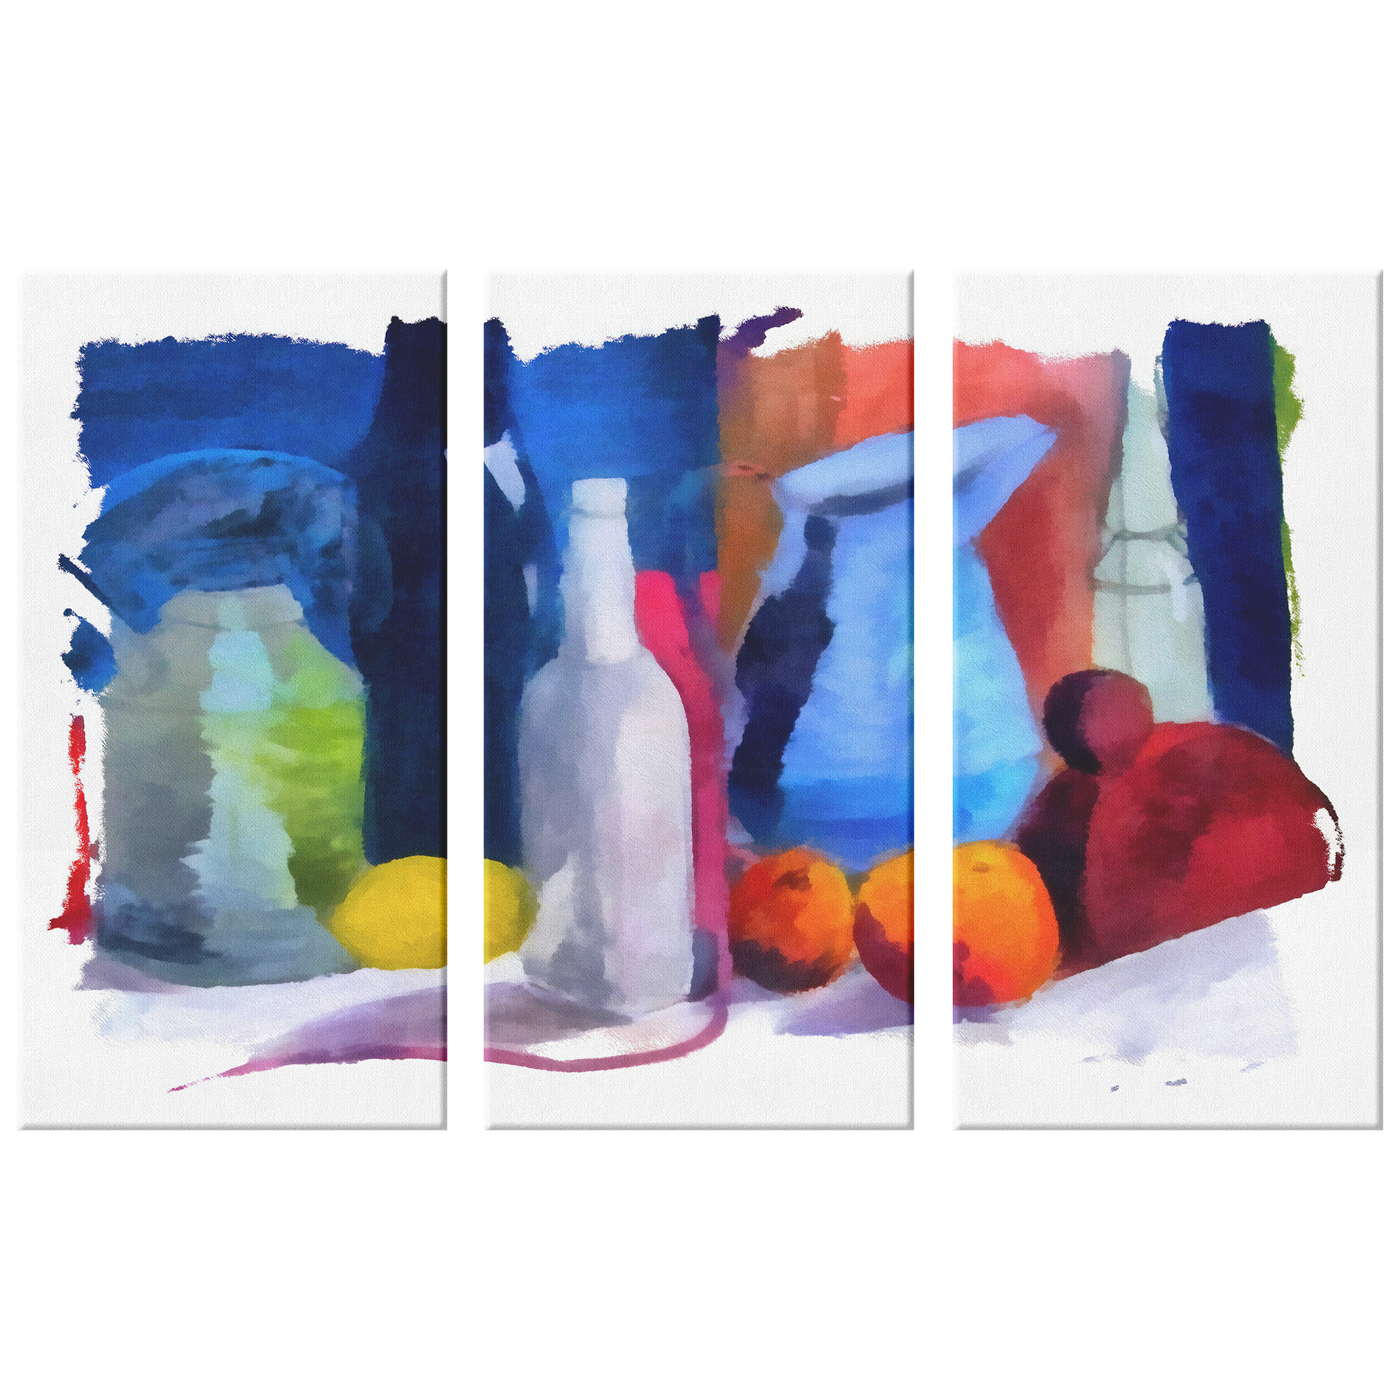 Bottles and Jugs Triptych